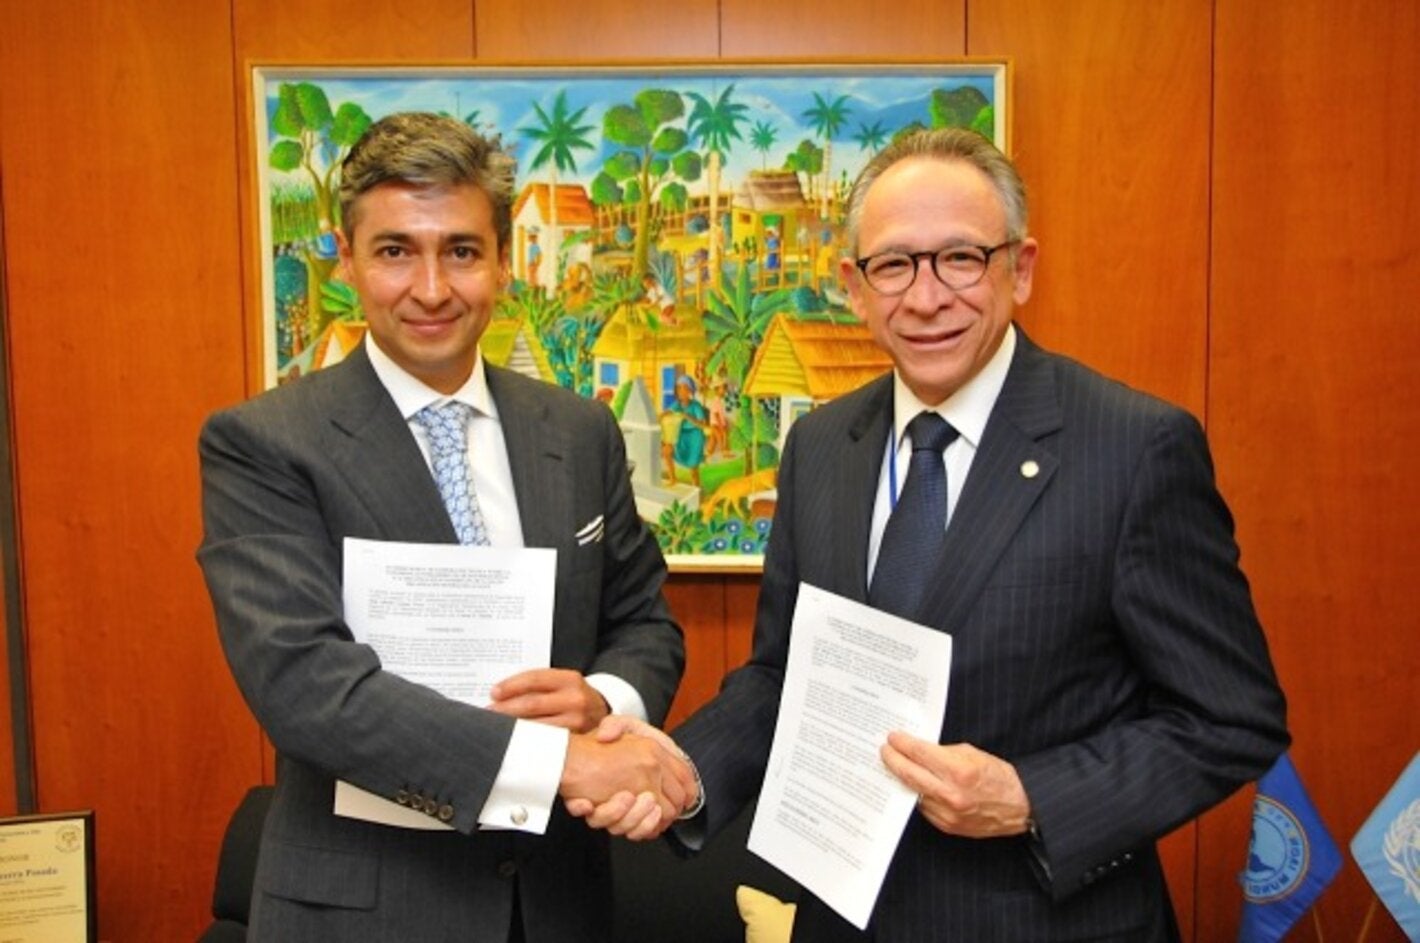 Juan Lozano (l.), secretary general of the Inter-American Conference on Social Security (CISS), met with Francisco Becerra, assistant director of the Pan American Health Organization (PAHO), in Washington, D.C., on 18 May 2015